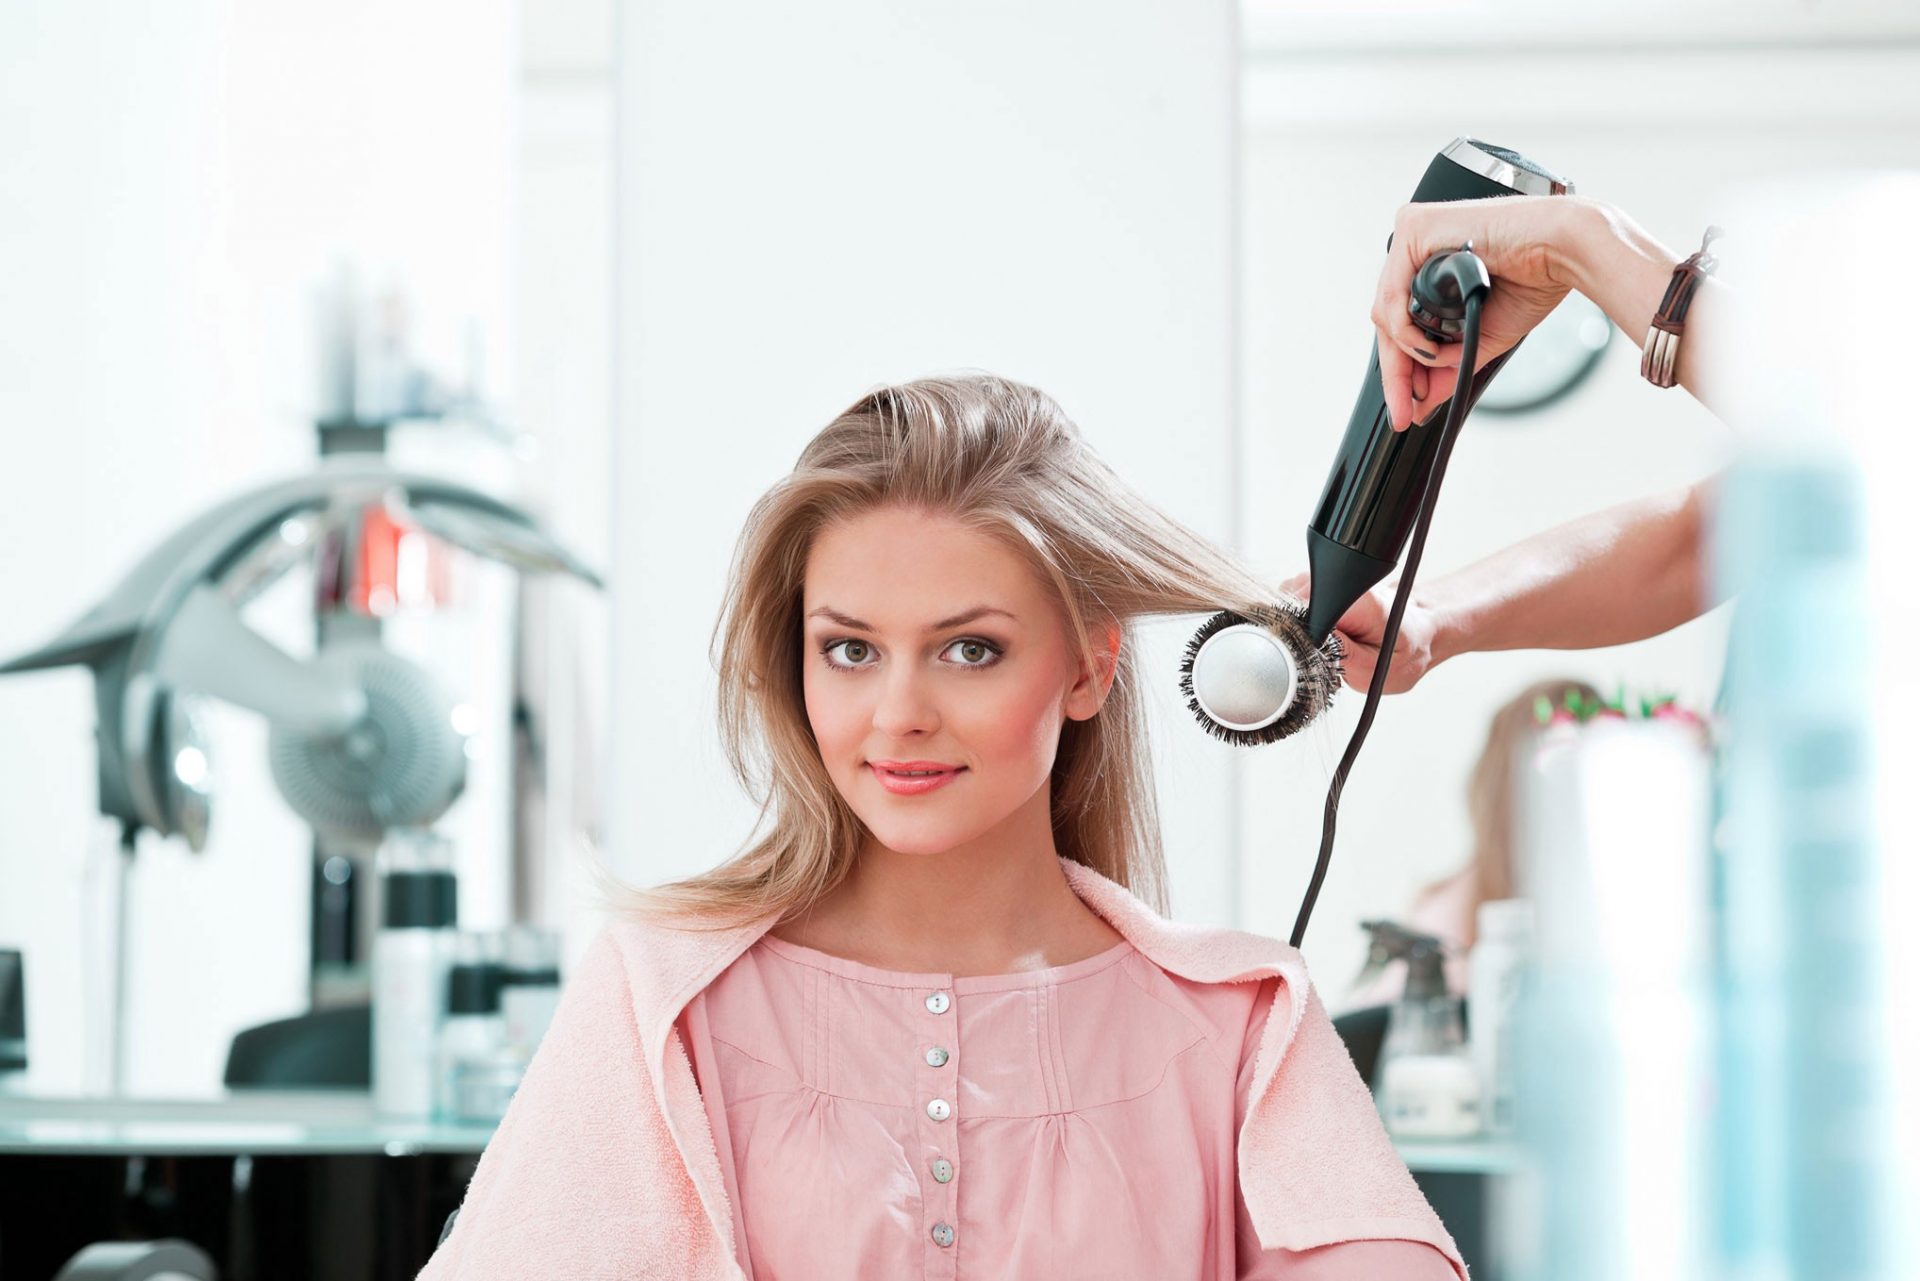 Heat Gun Vs. Hair Dryer: Can Both Be Used For Hair?